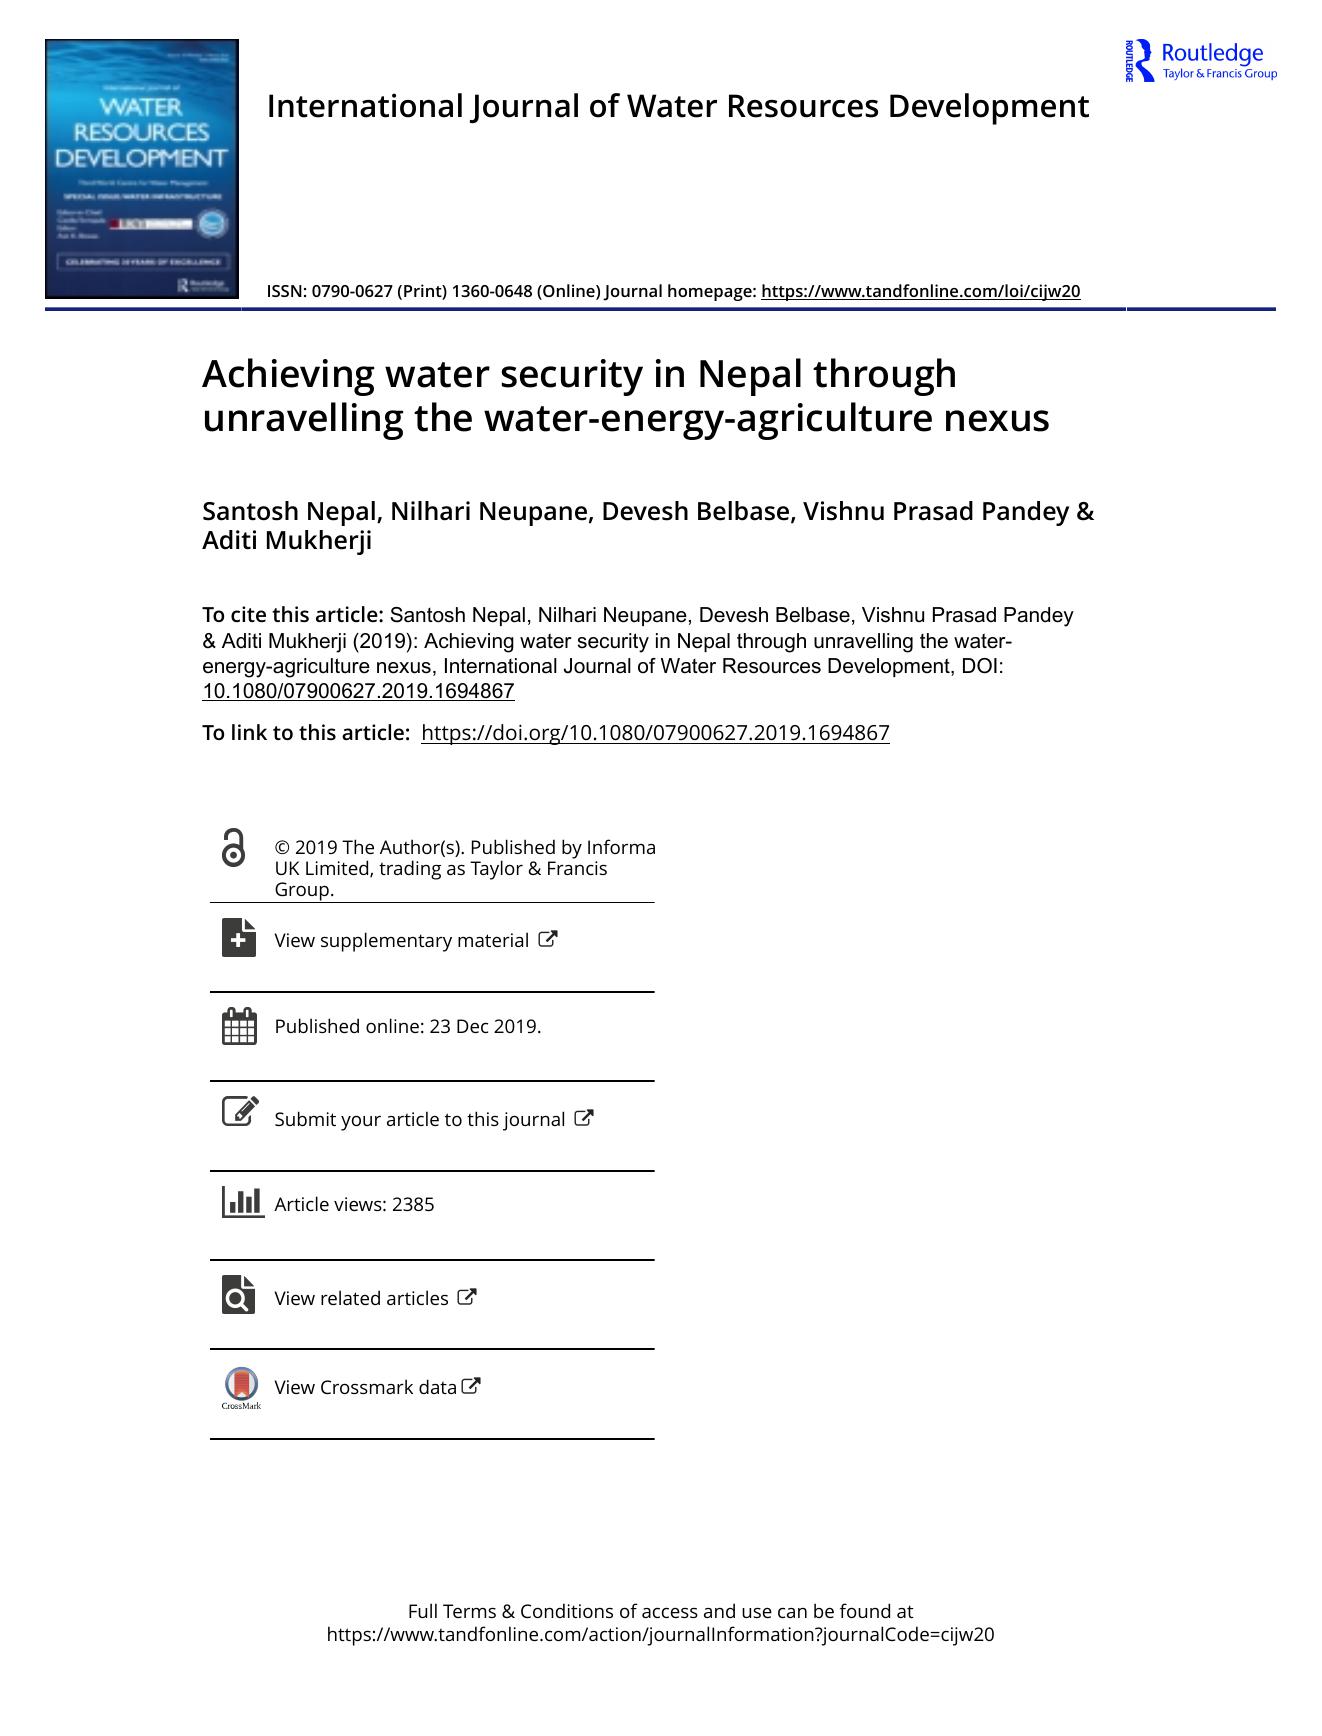 Achieving water security in Nepal through unravelling the water-energy-agriculture nexus